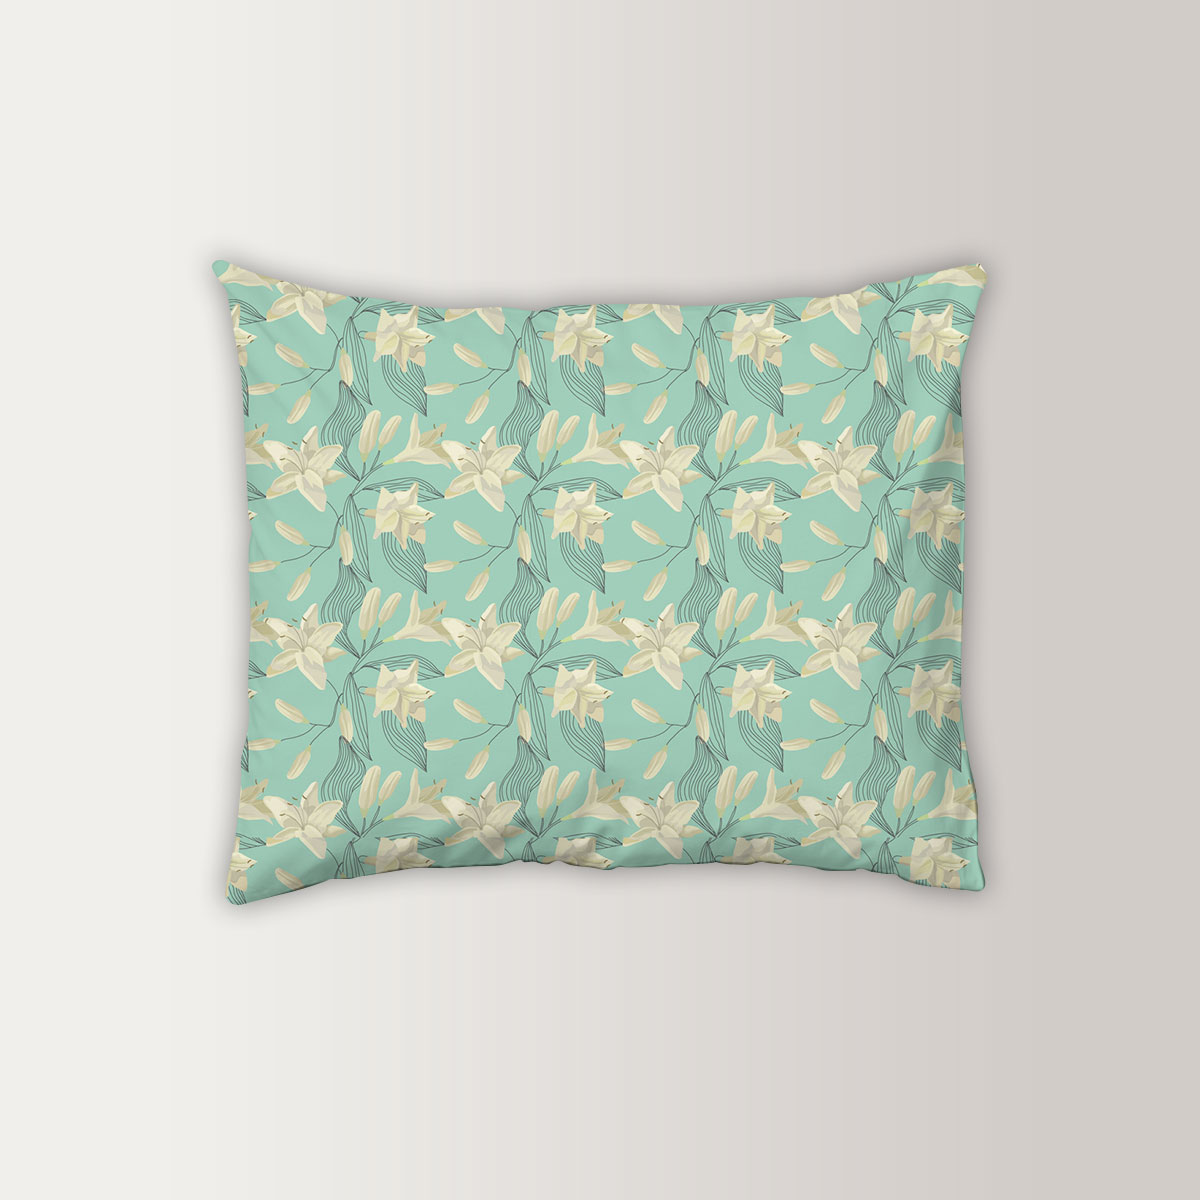 Tropical Lily FLowers Pillow Case